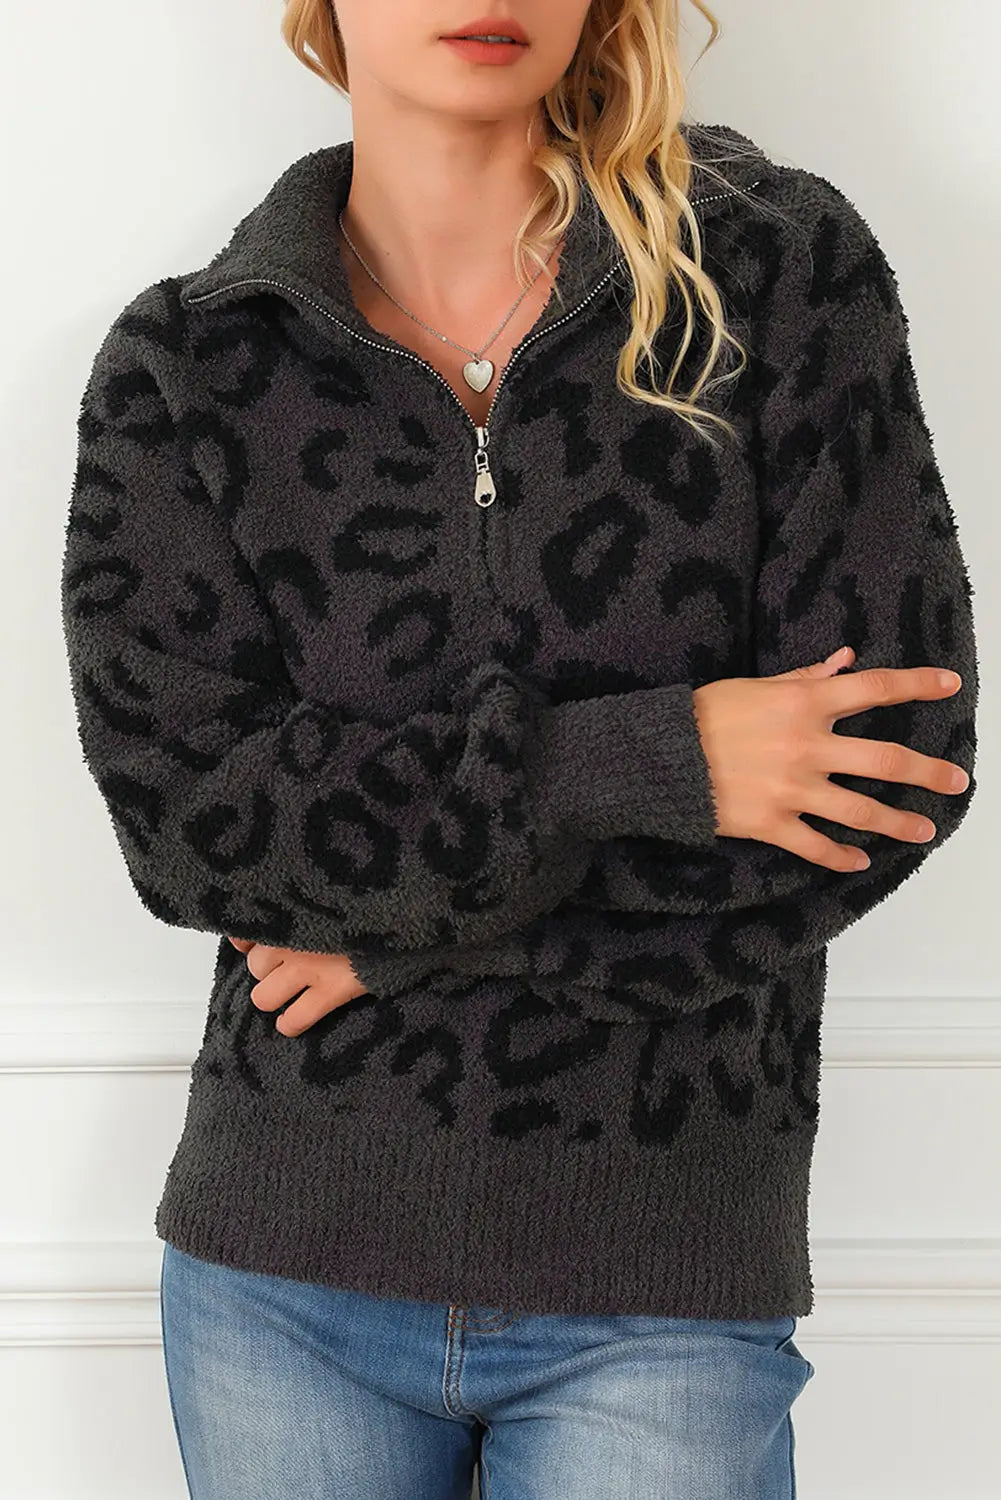 Leopard animal print zipped collared sweater - s / 100% polyester - sweaters & cardigans